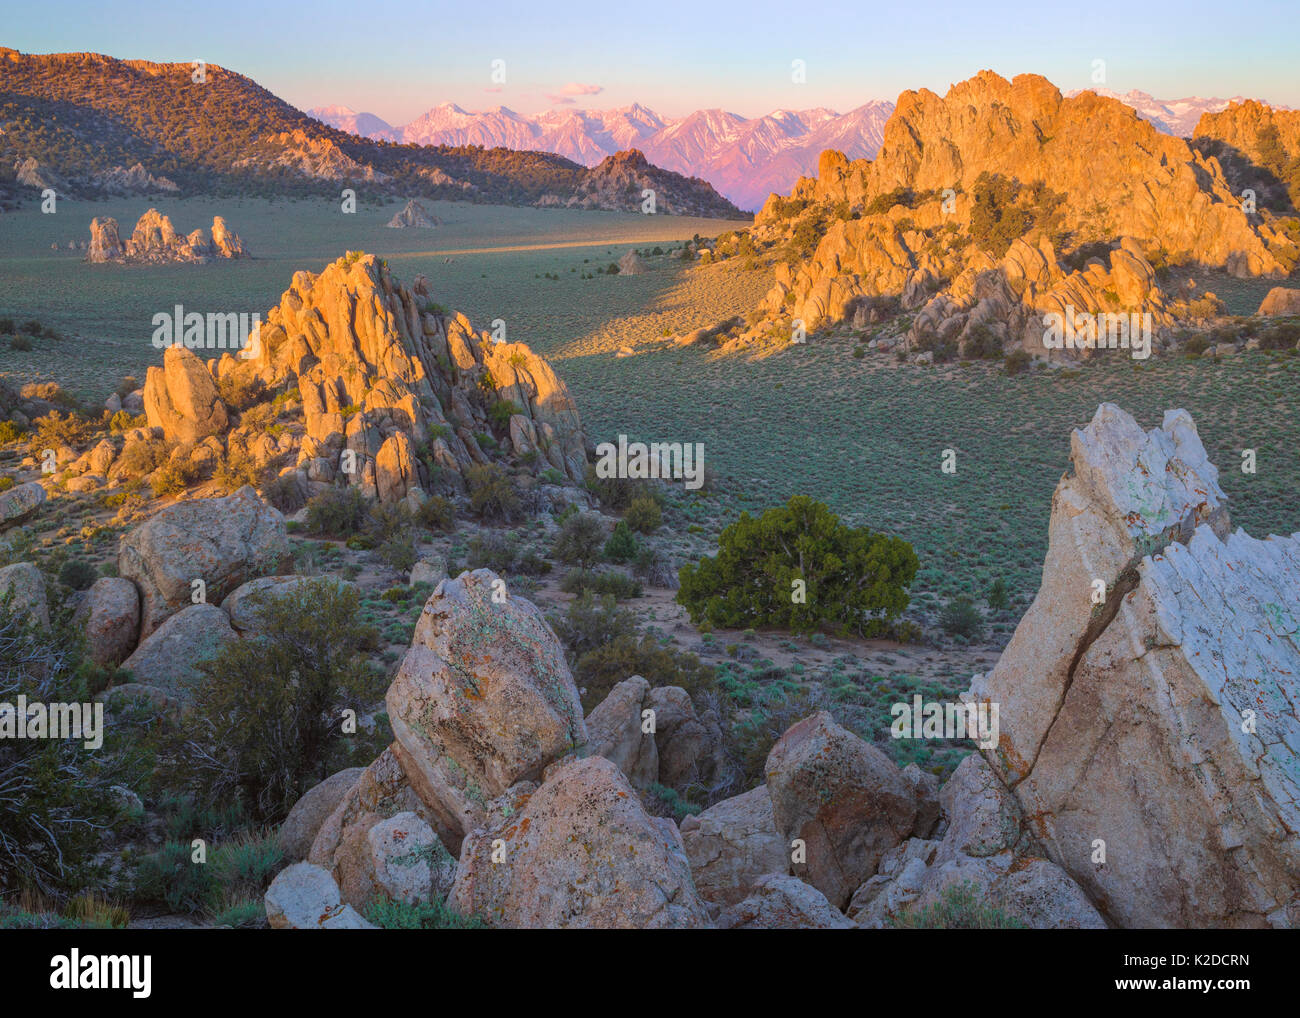 Inyo Mountains with sagebrush valleys, rocky outcroppings, Pinyon pines, Juniper trees and views of Sierra Nevada, California, USA, May. Stock Photo